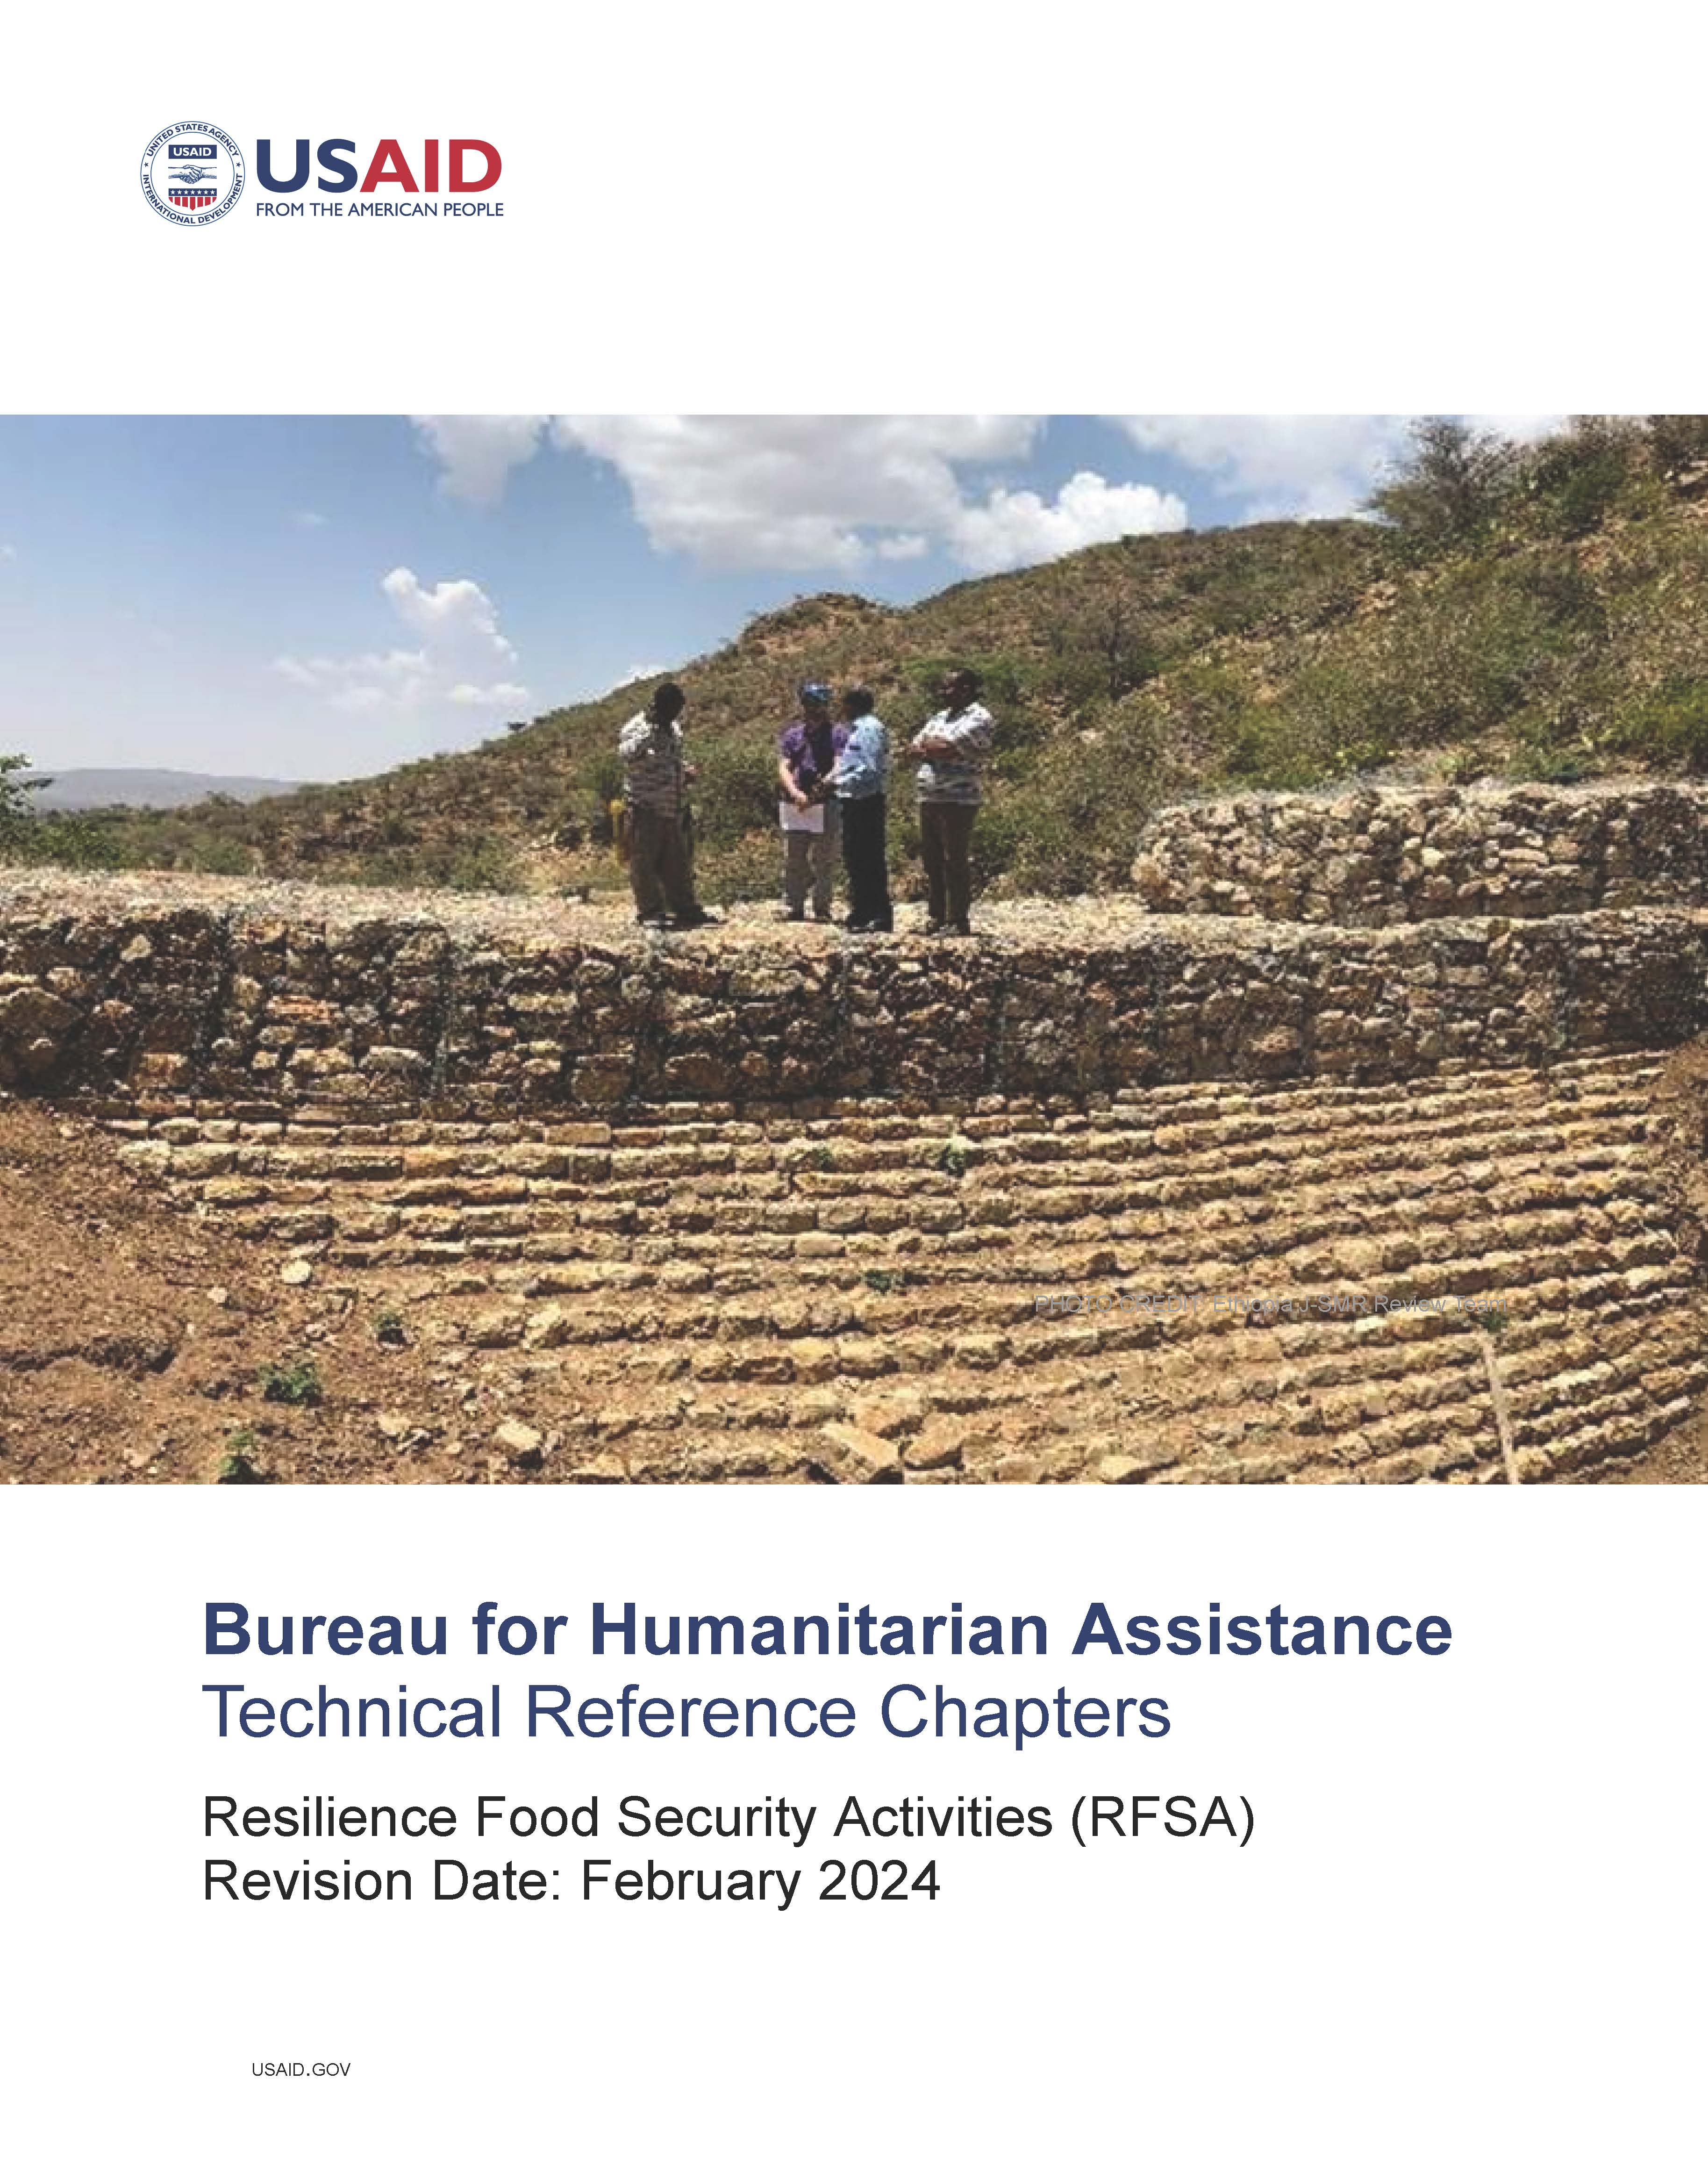 Cover page of USAID BHA RFSA Technical References